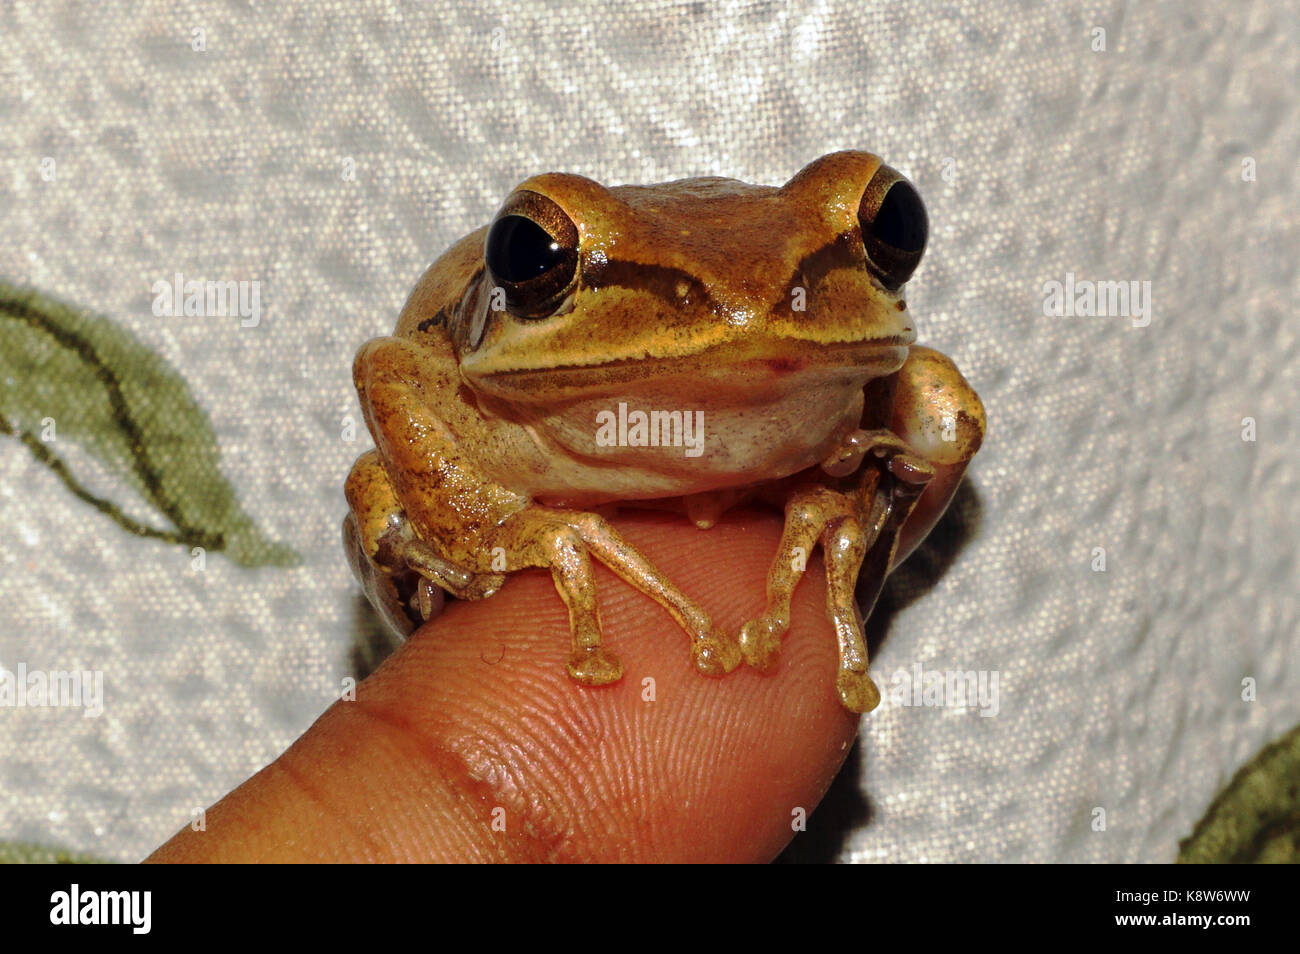 A Tiny frog in the tip of finger Stock Photo